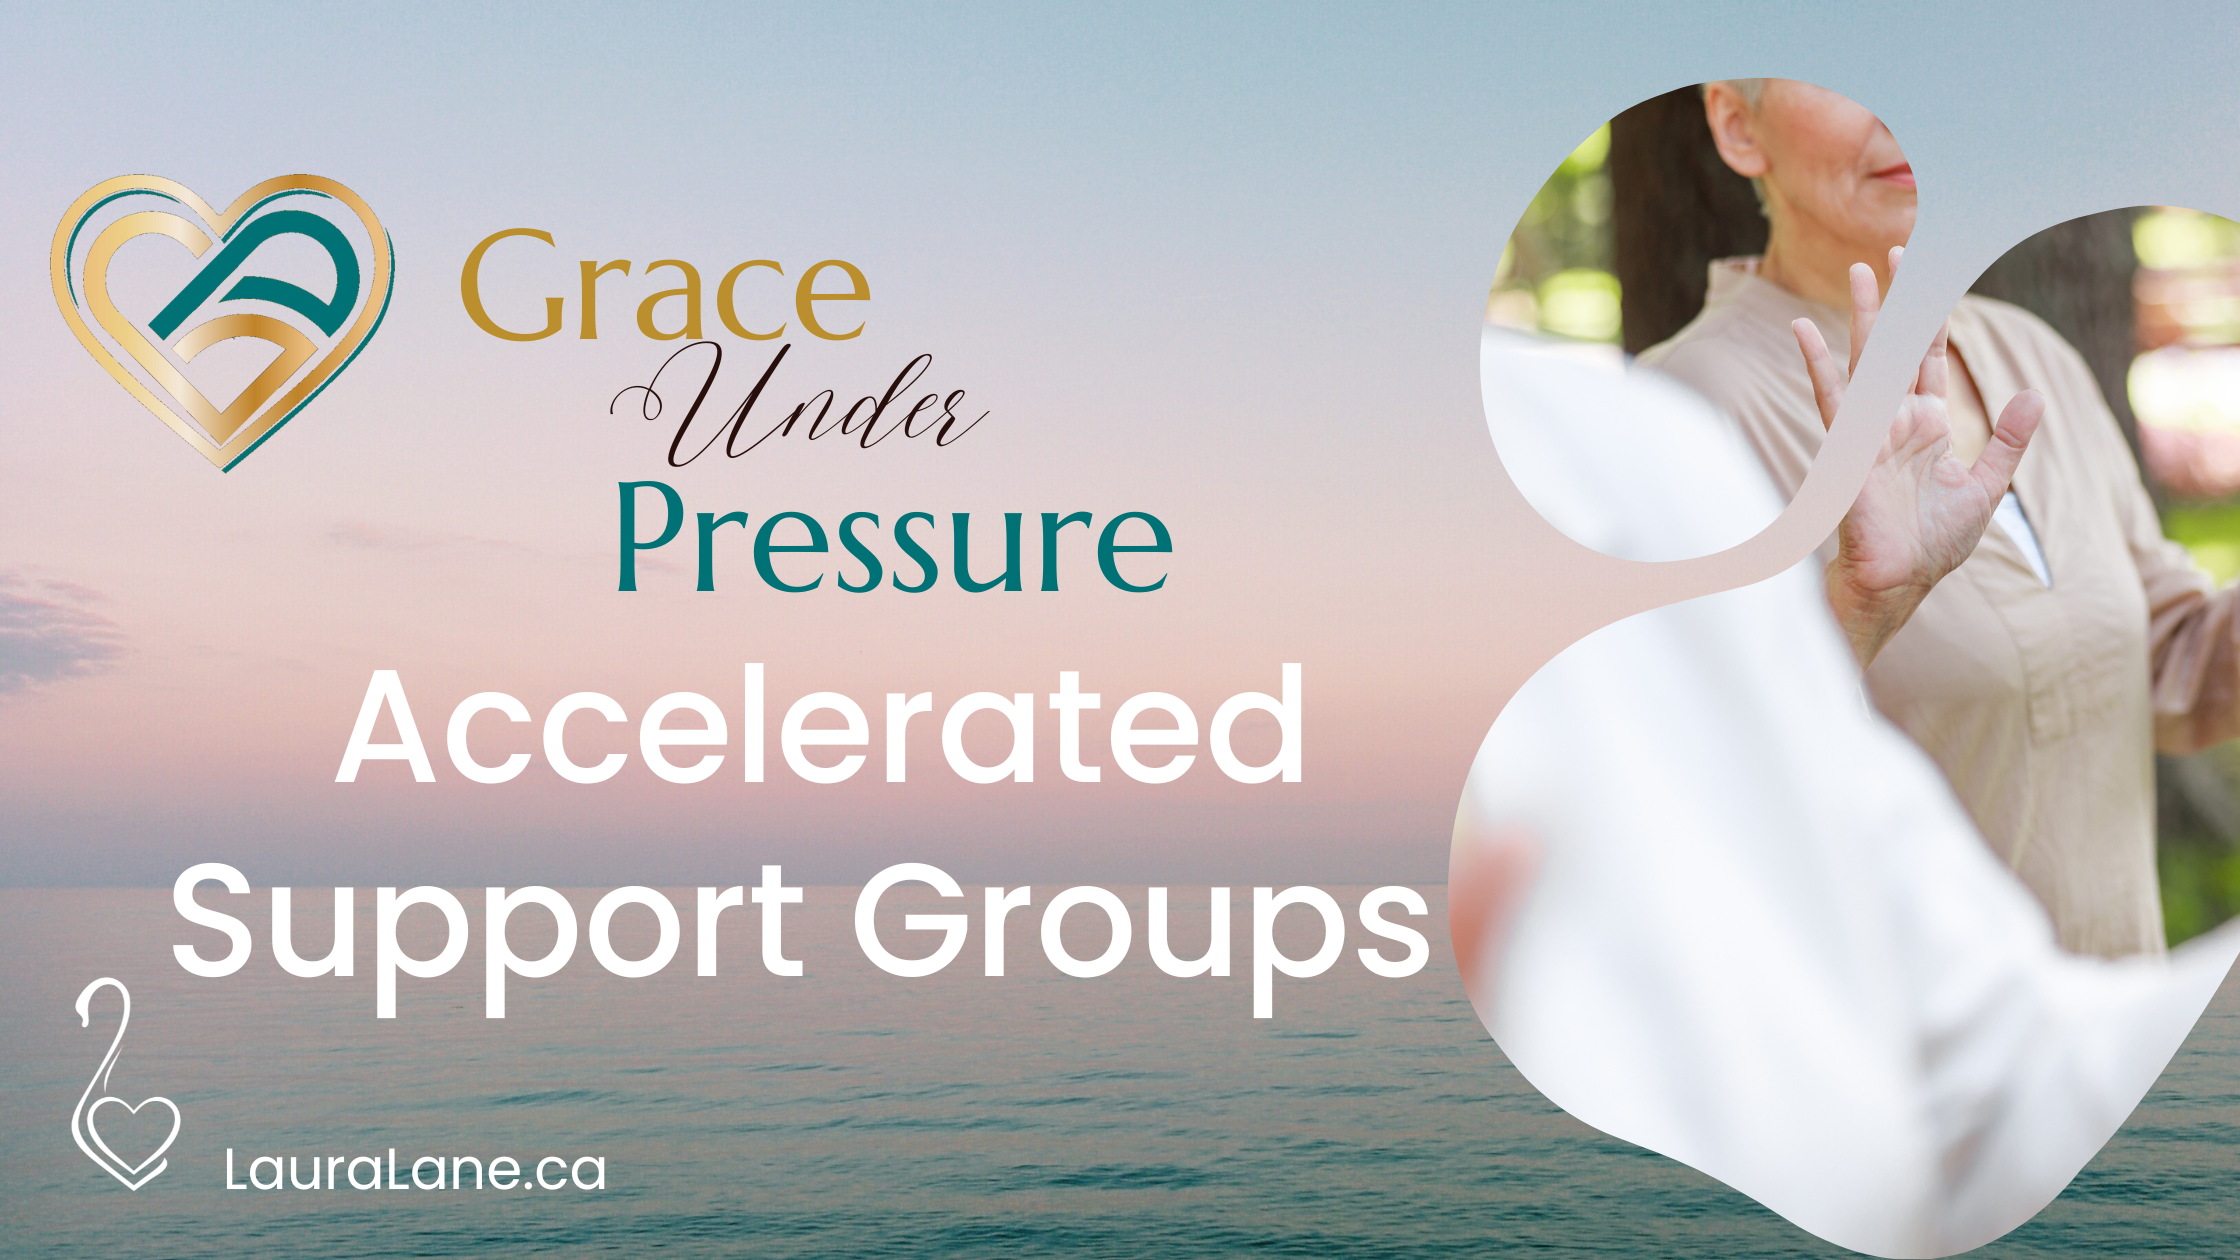 Grace Under Pressure Accelerated Support Groups